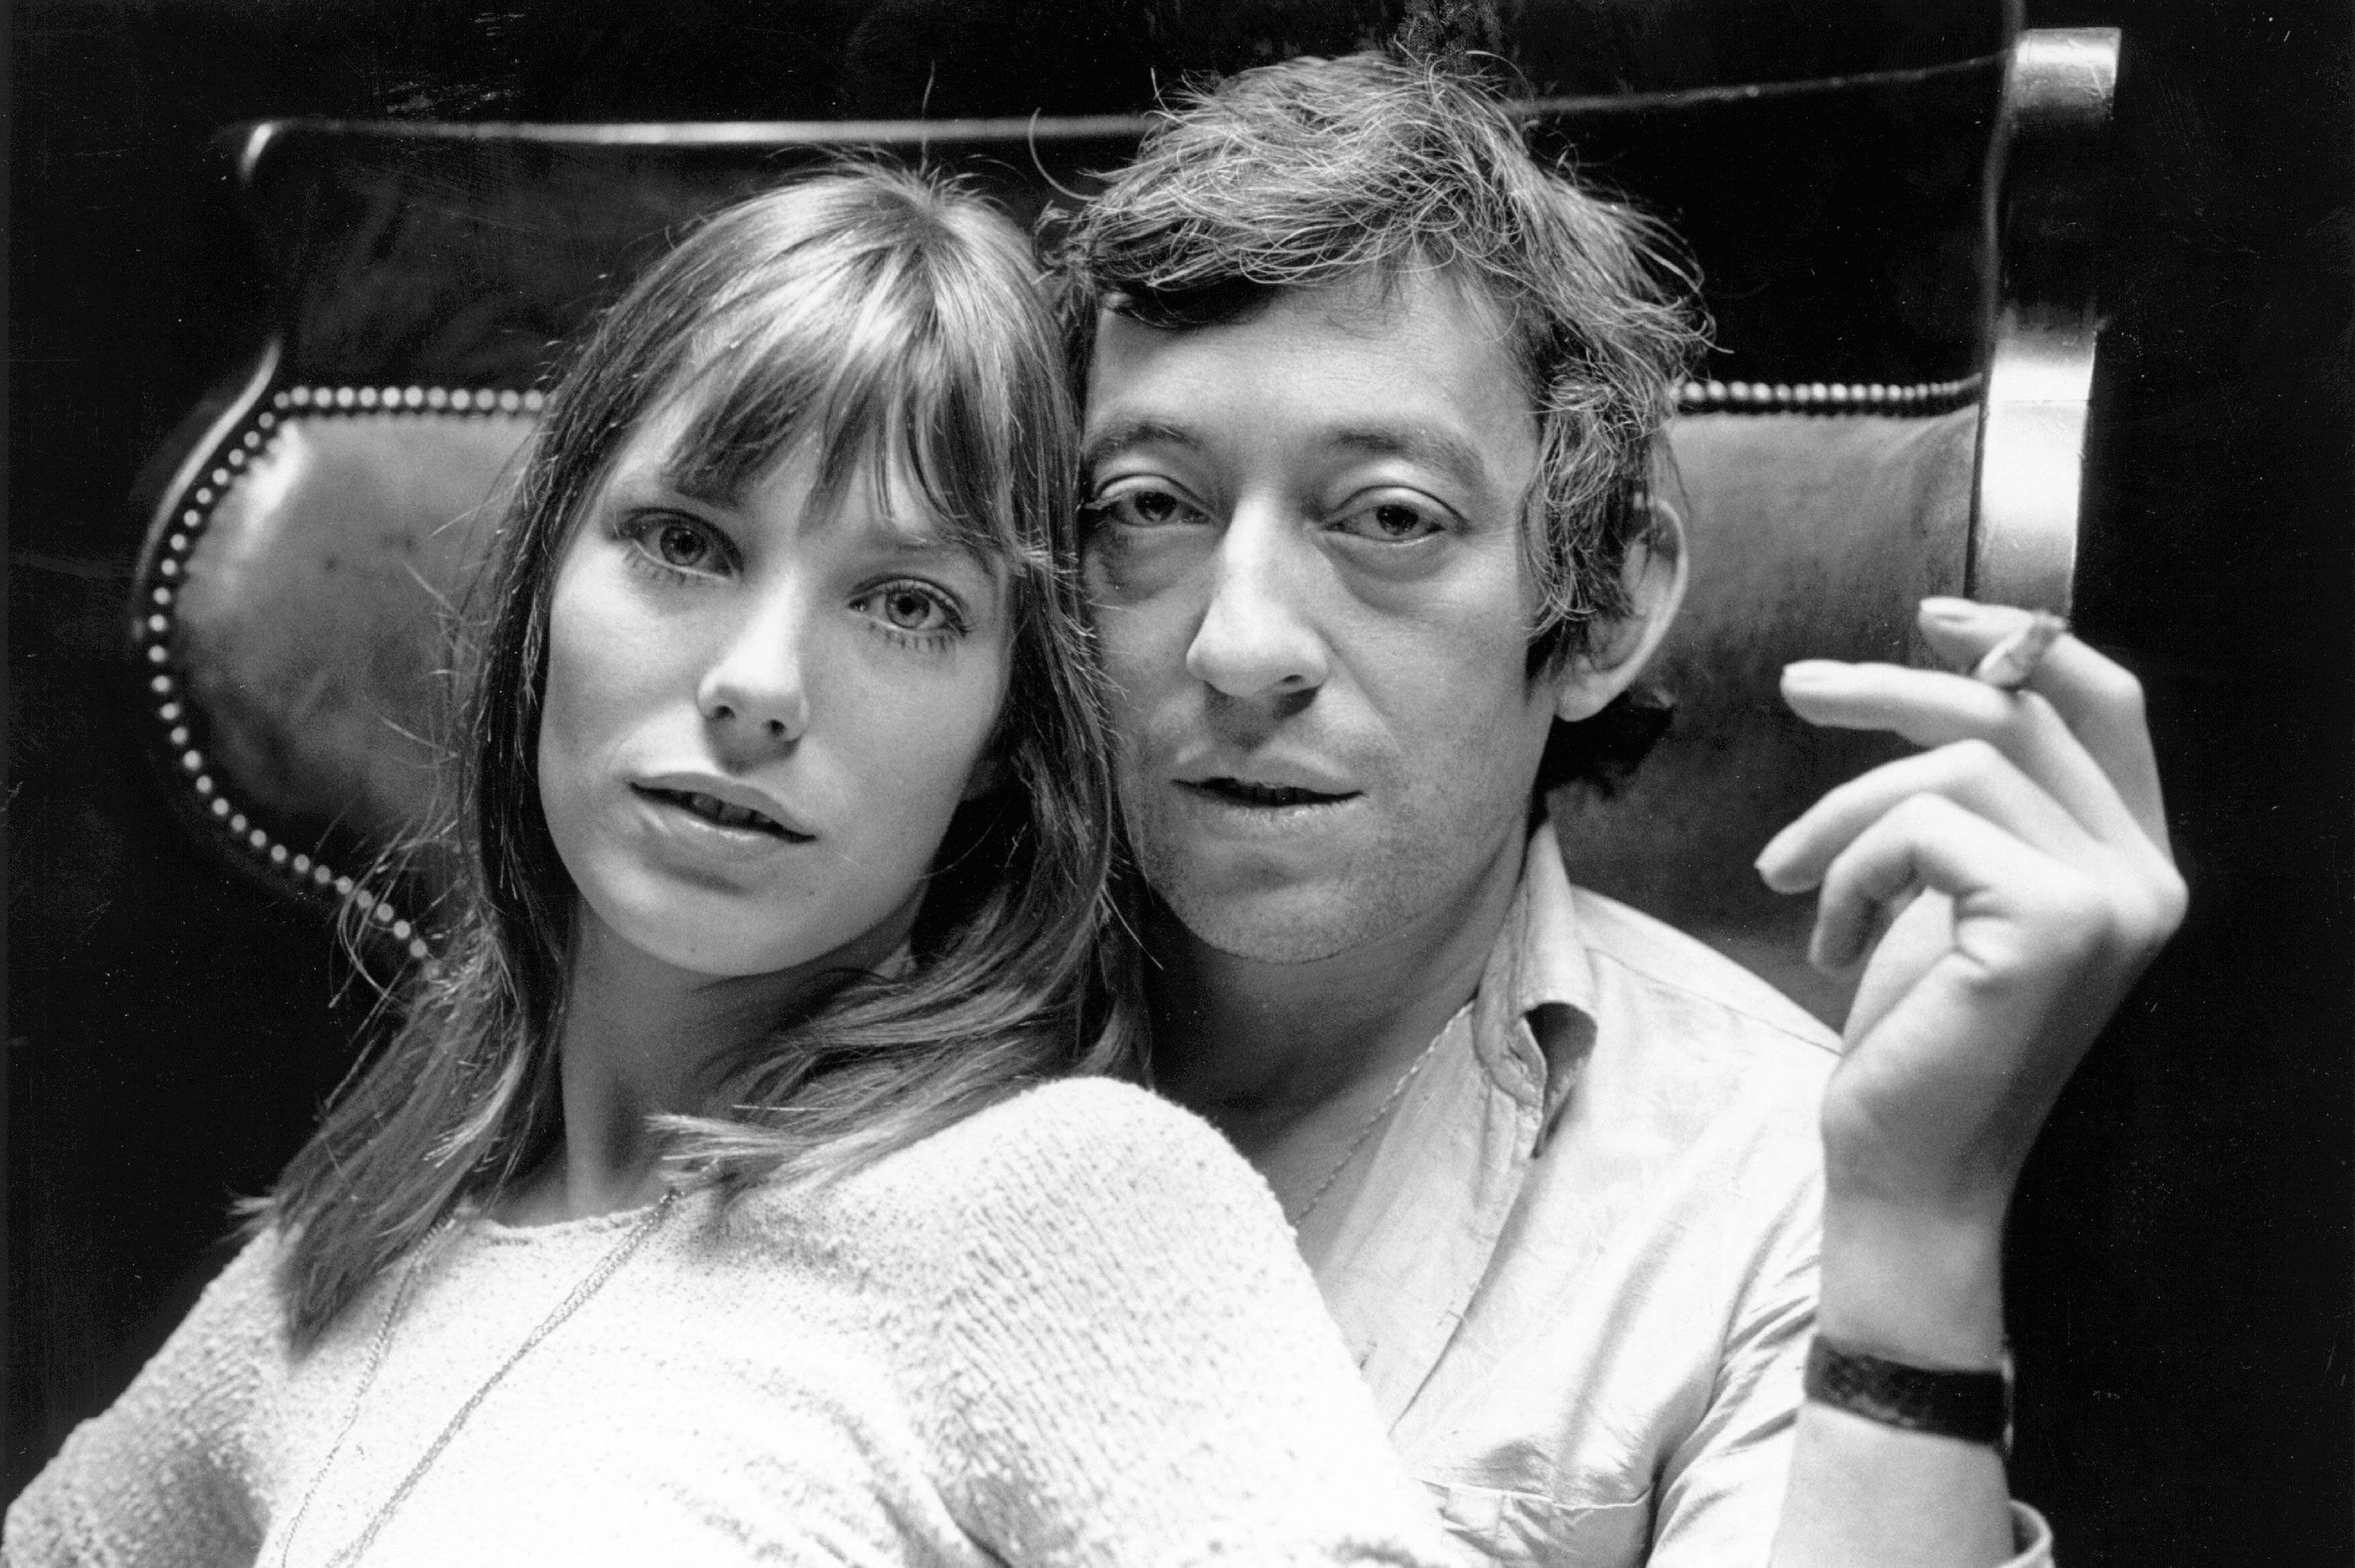 What do you all think of Jane Birkin's style now?